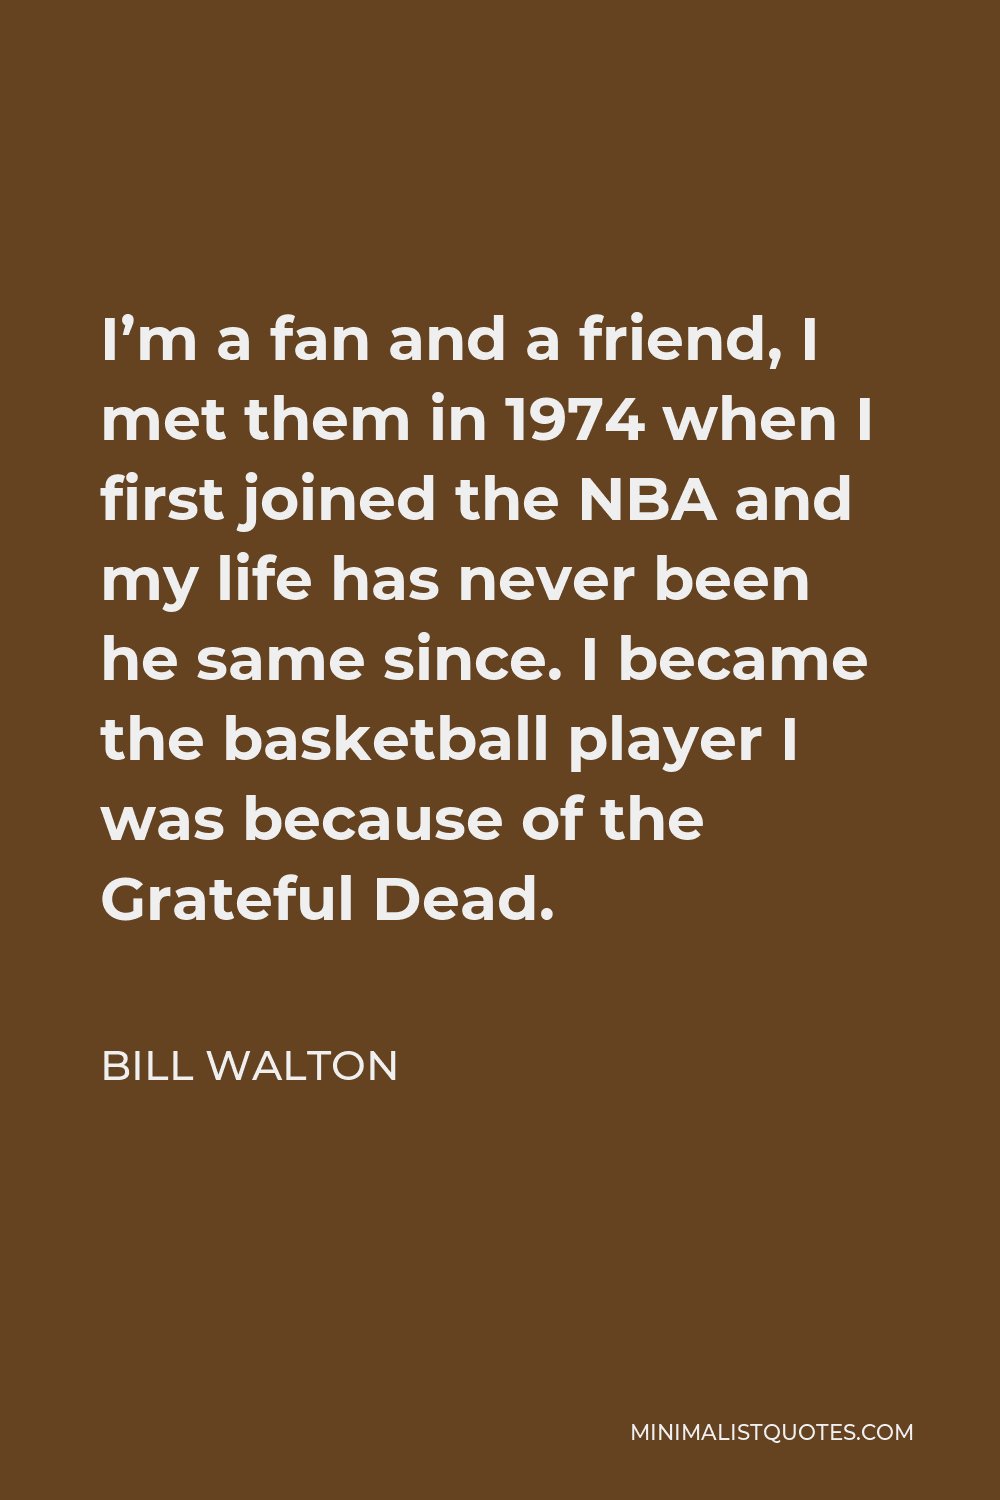 Bill Walton Quote - I’m a fan and a friend, I met them in 1974 when I first joined the NBA and my life has never been he same since. I became the basketball player I was because of the Grateful Dead.